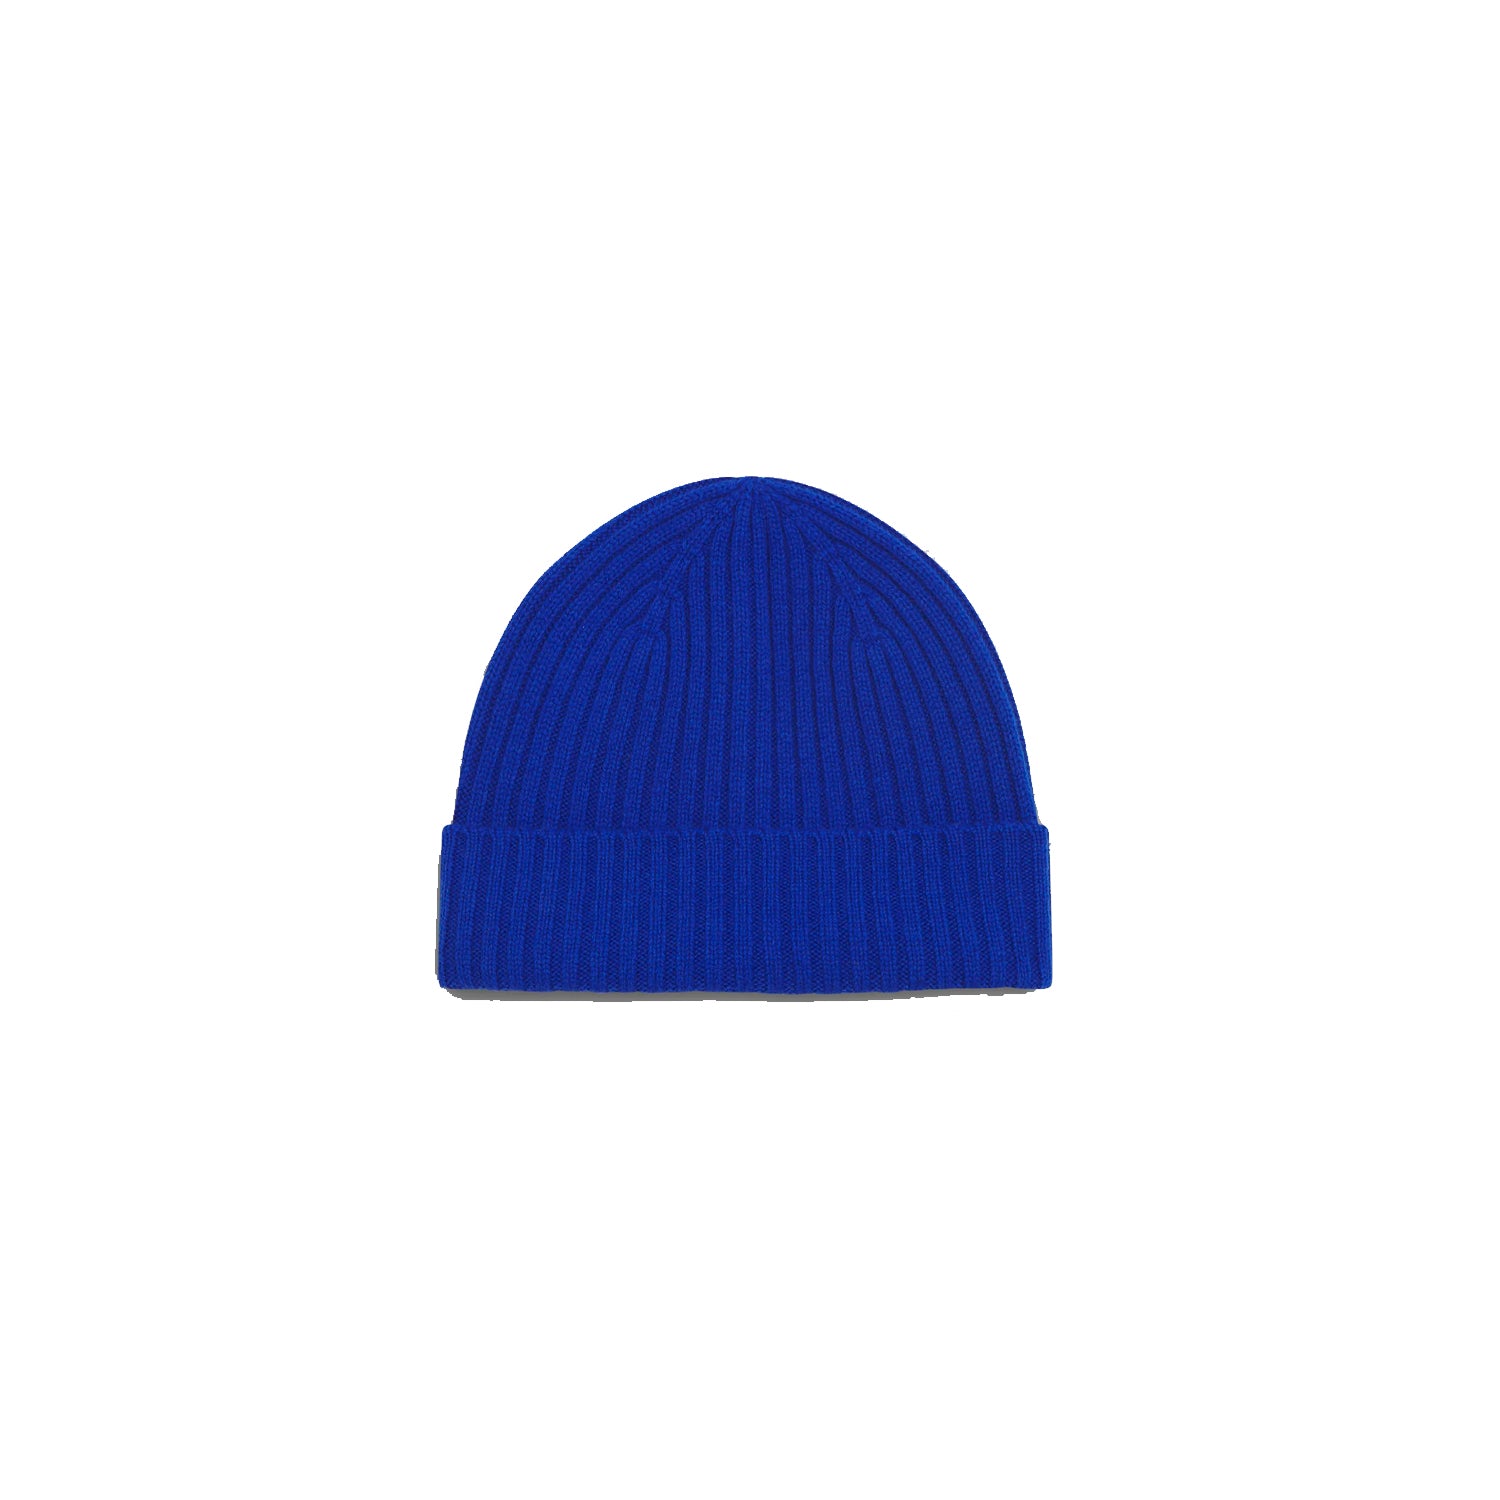 Lambswool Knit Beanie